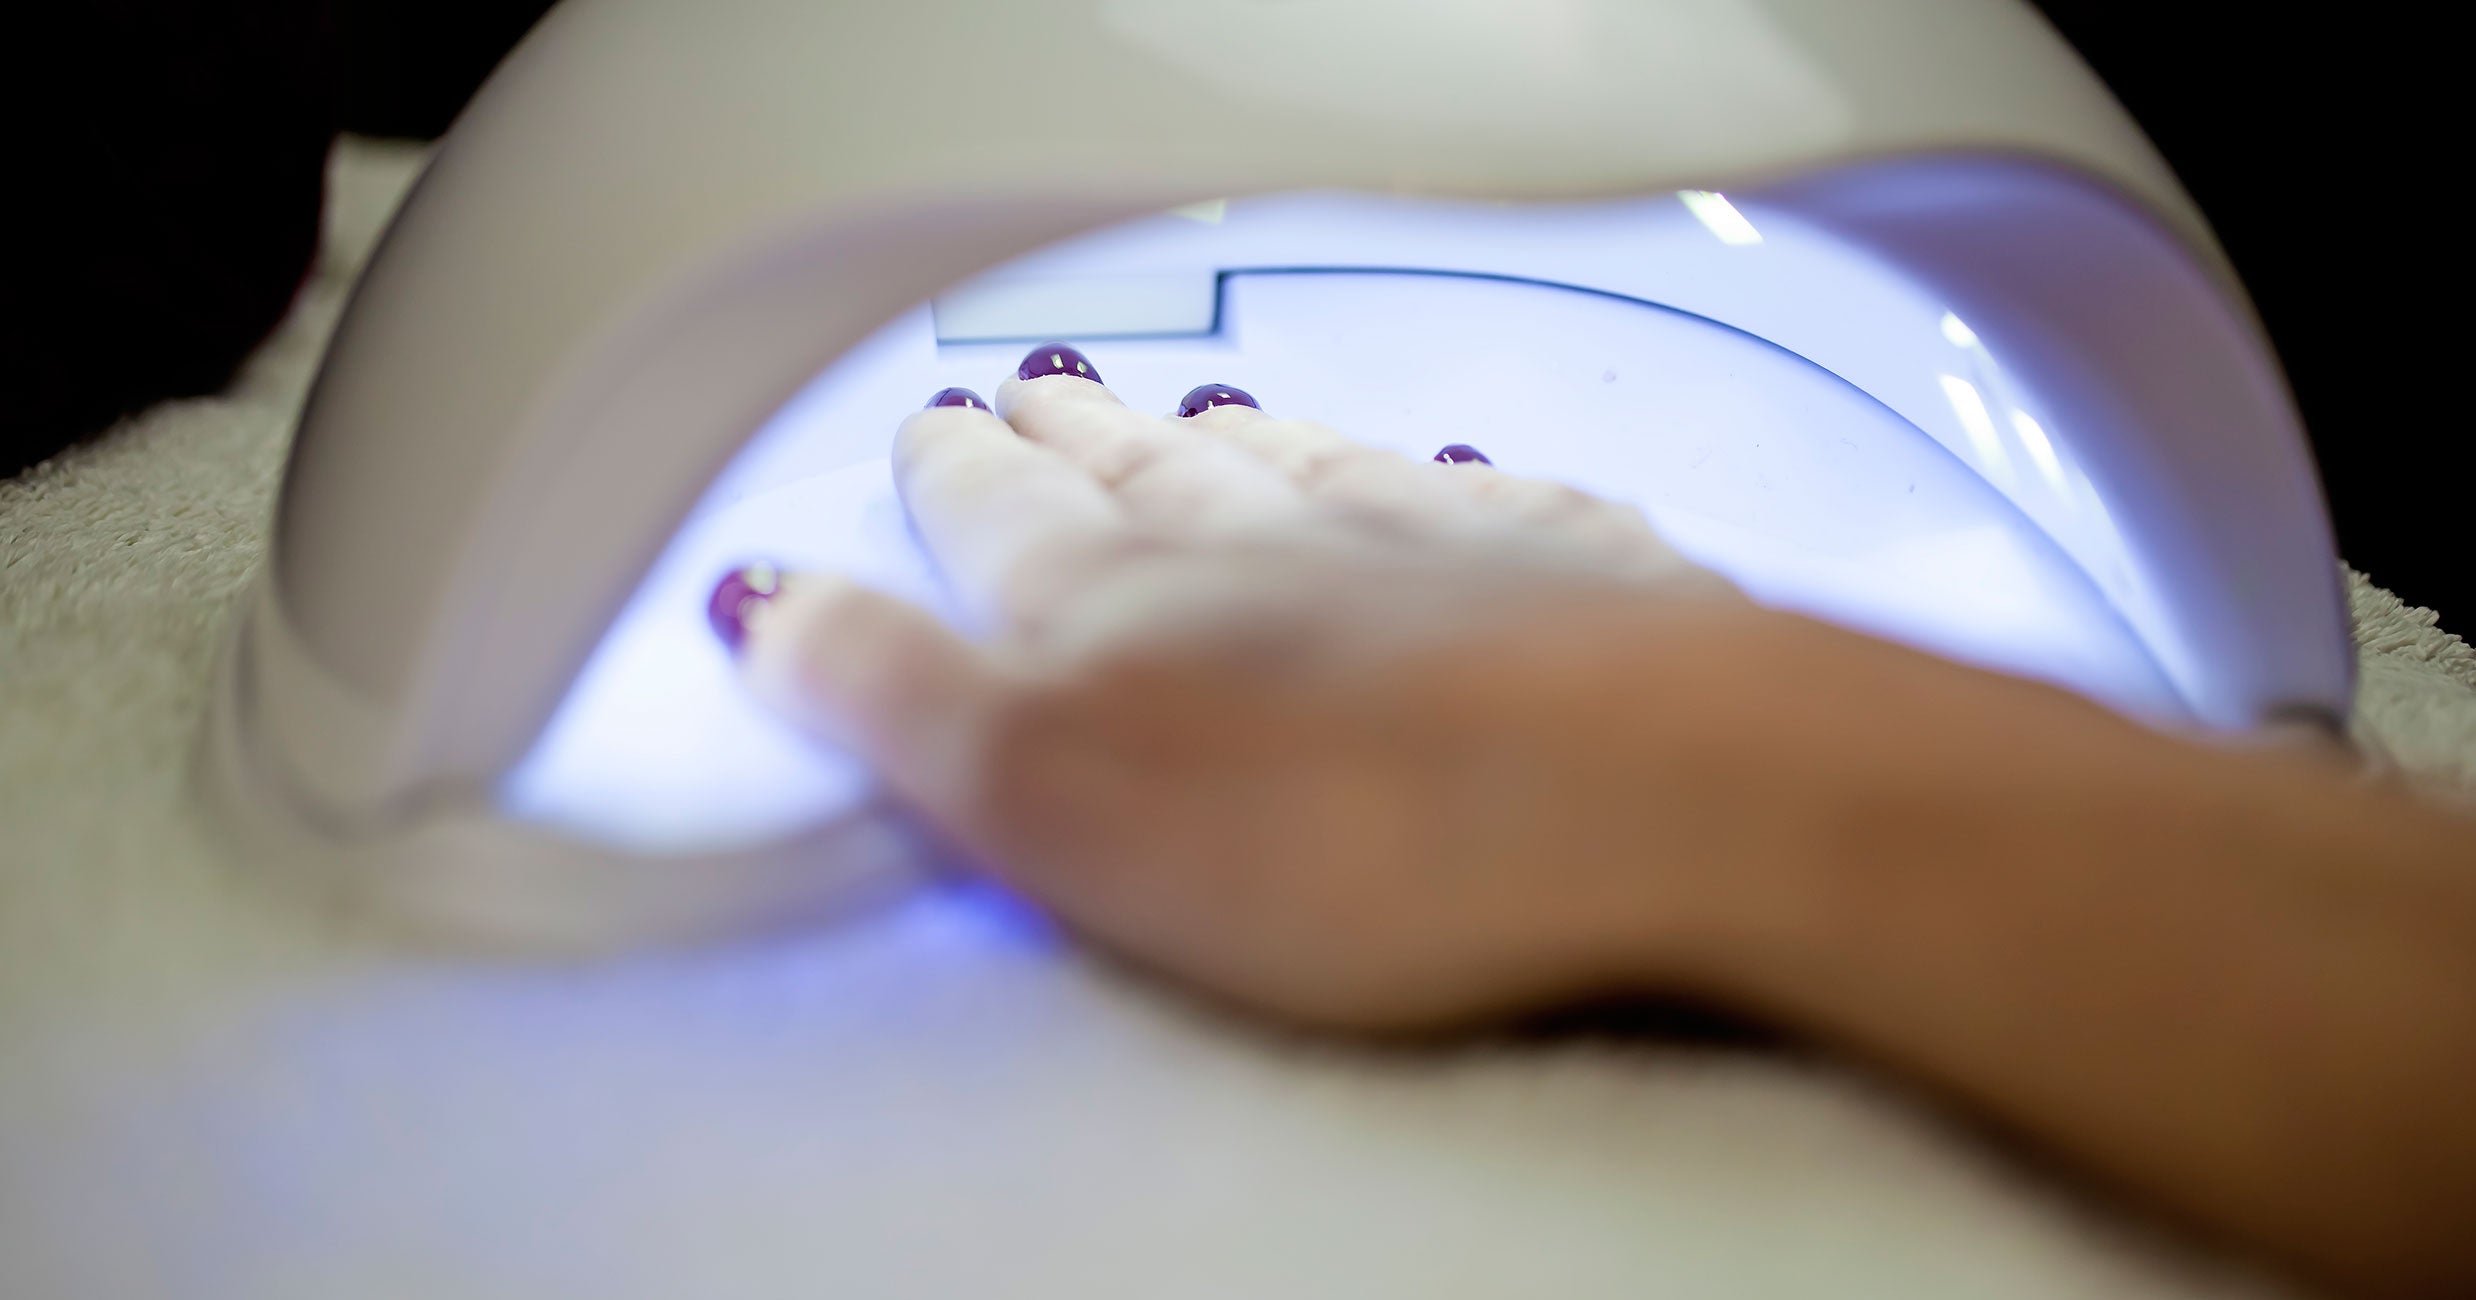 Are Gel Manicures Dangerous? New Study On UV Lamp Risks